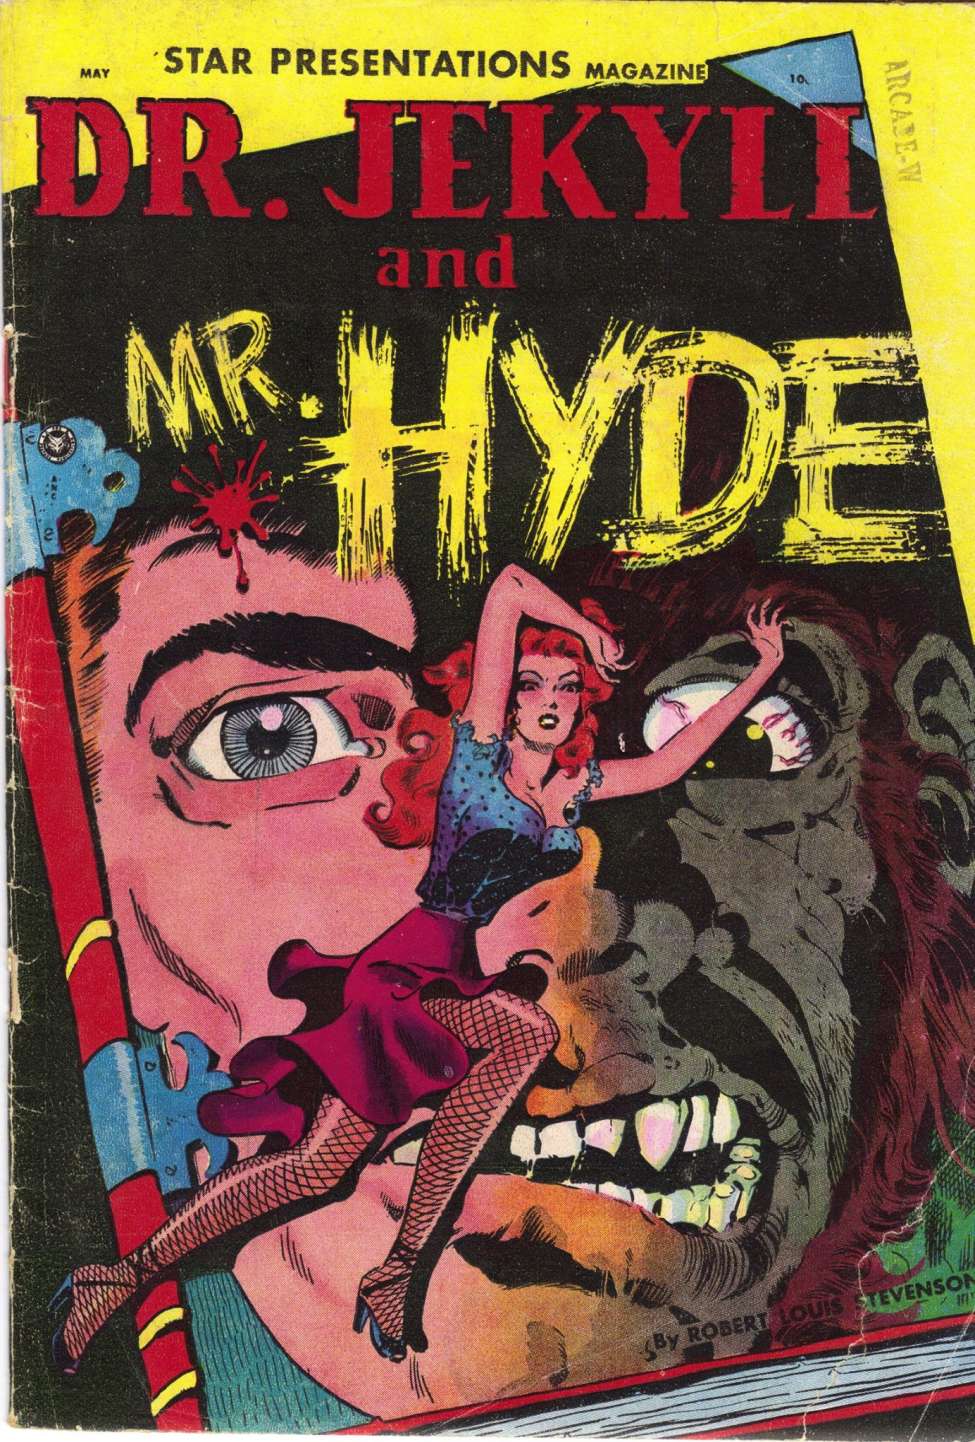 Comic Book Cover For A Star Presentation Magazine 3 - Dr. Jekyll & Mr. Hyde